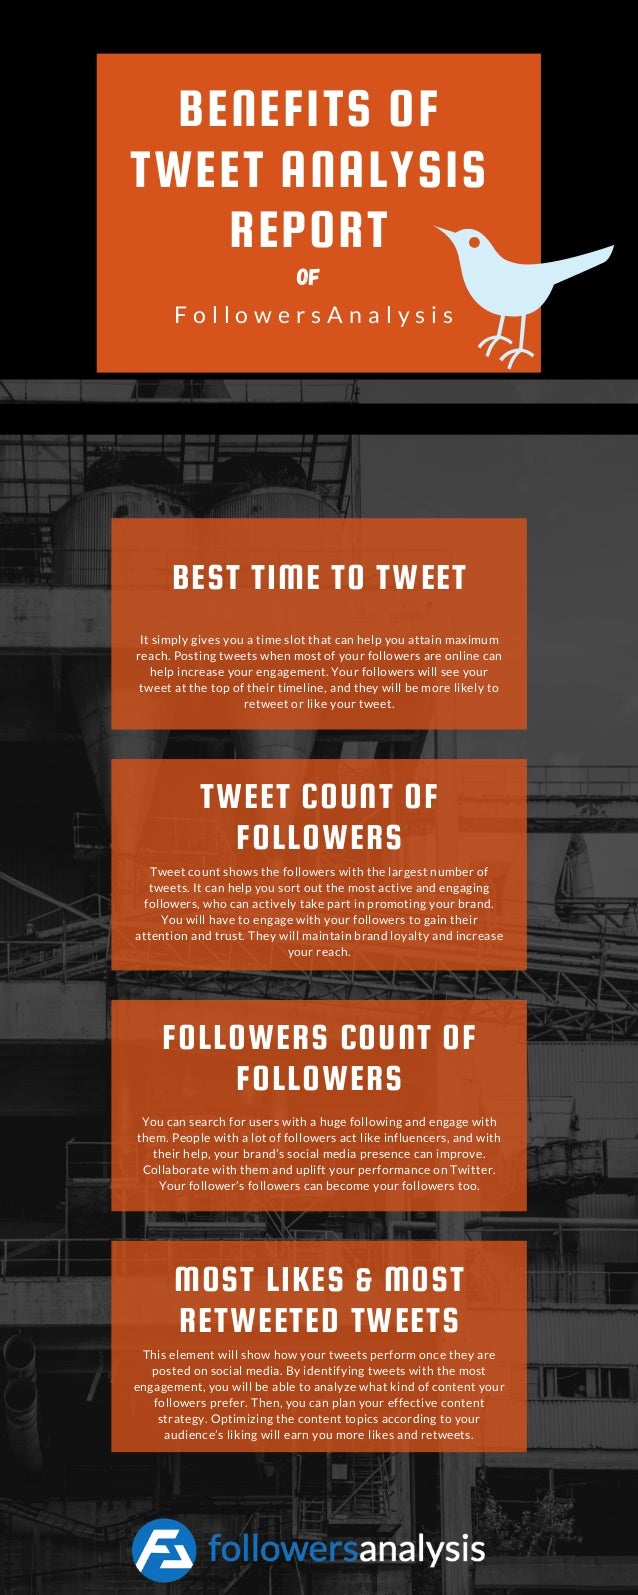 BENEFITS OF
TWEET ANALYSIS
REPORT
It simply gives you a time slot that can help you attain maximum
reach. Posting tweets when most of your followers are online can
help increase your engagement. Your followers will see your
tweet at the top of their timeline, and they will be more likely to
retweet or like your tweet.
TWEET COUNT OF
FOLLOWERS
Tweet count shows the followers with the largest number of
tweets. It can help you sort out the most active and engaging
followers, who can actively take part in promoting your brand.
You will have to engage with your followers to gain their
attention and trust. They will maintain brand loyalty and increase
your reach.
FOLLOWERS COUNT OF
FOLLOWERS
You can search for users with a huge following and engage with
them. People with a lot of followers act like influencers, and with
their help, your brand’s social media presence can improve.
Collaborate with them and uplift your performance on Twitter.
Your follower’s followers can become your followers too.
MOST LIKES & MOST
RETWEETED TWEETS
This element will show how your tweets perform once they are
posted on social media. By identifying tweets with the most
engagement, you will be able to analyze what kind of content your
followers prefer. Then, you can plan your effective content
strategy. Optimizing the content topics according to your
audience’s liking will earn you more likes and retweets.
F o l l o w e r s A n a l y s i s
BEST TIME TO TWEET
OF
 